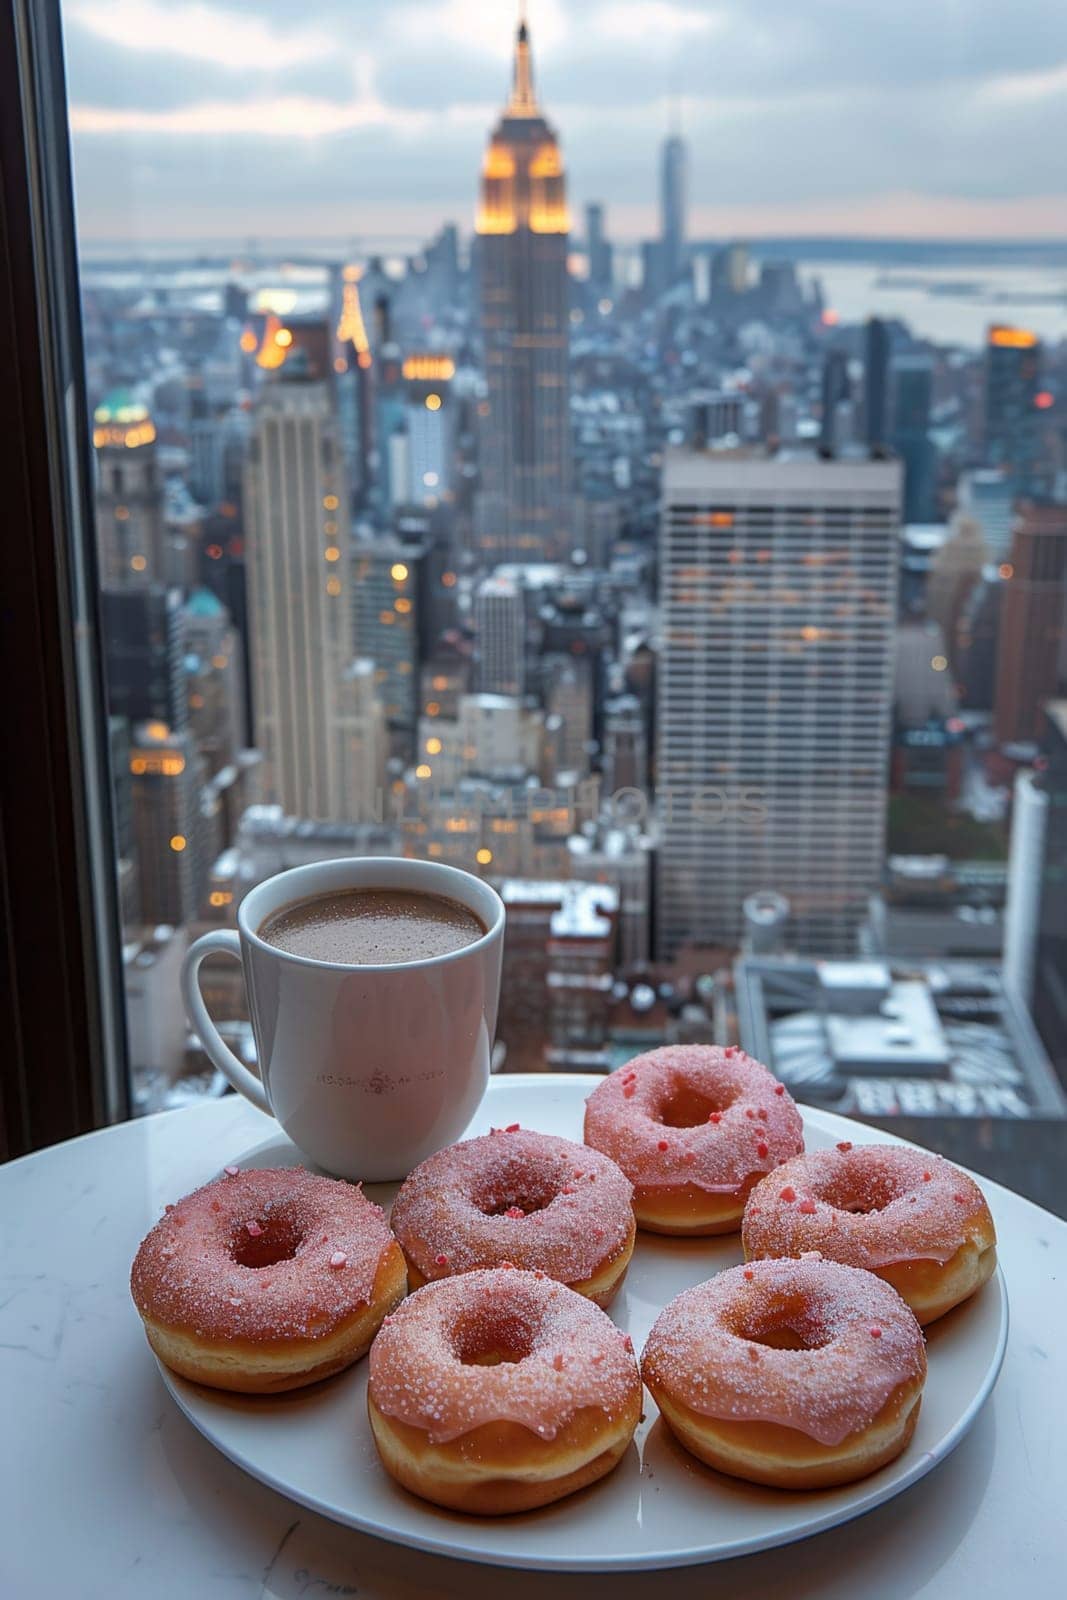 A set of doughnuts on a table near a window with the city in the background . National Doughnut Day by Lobachad